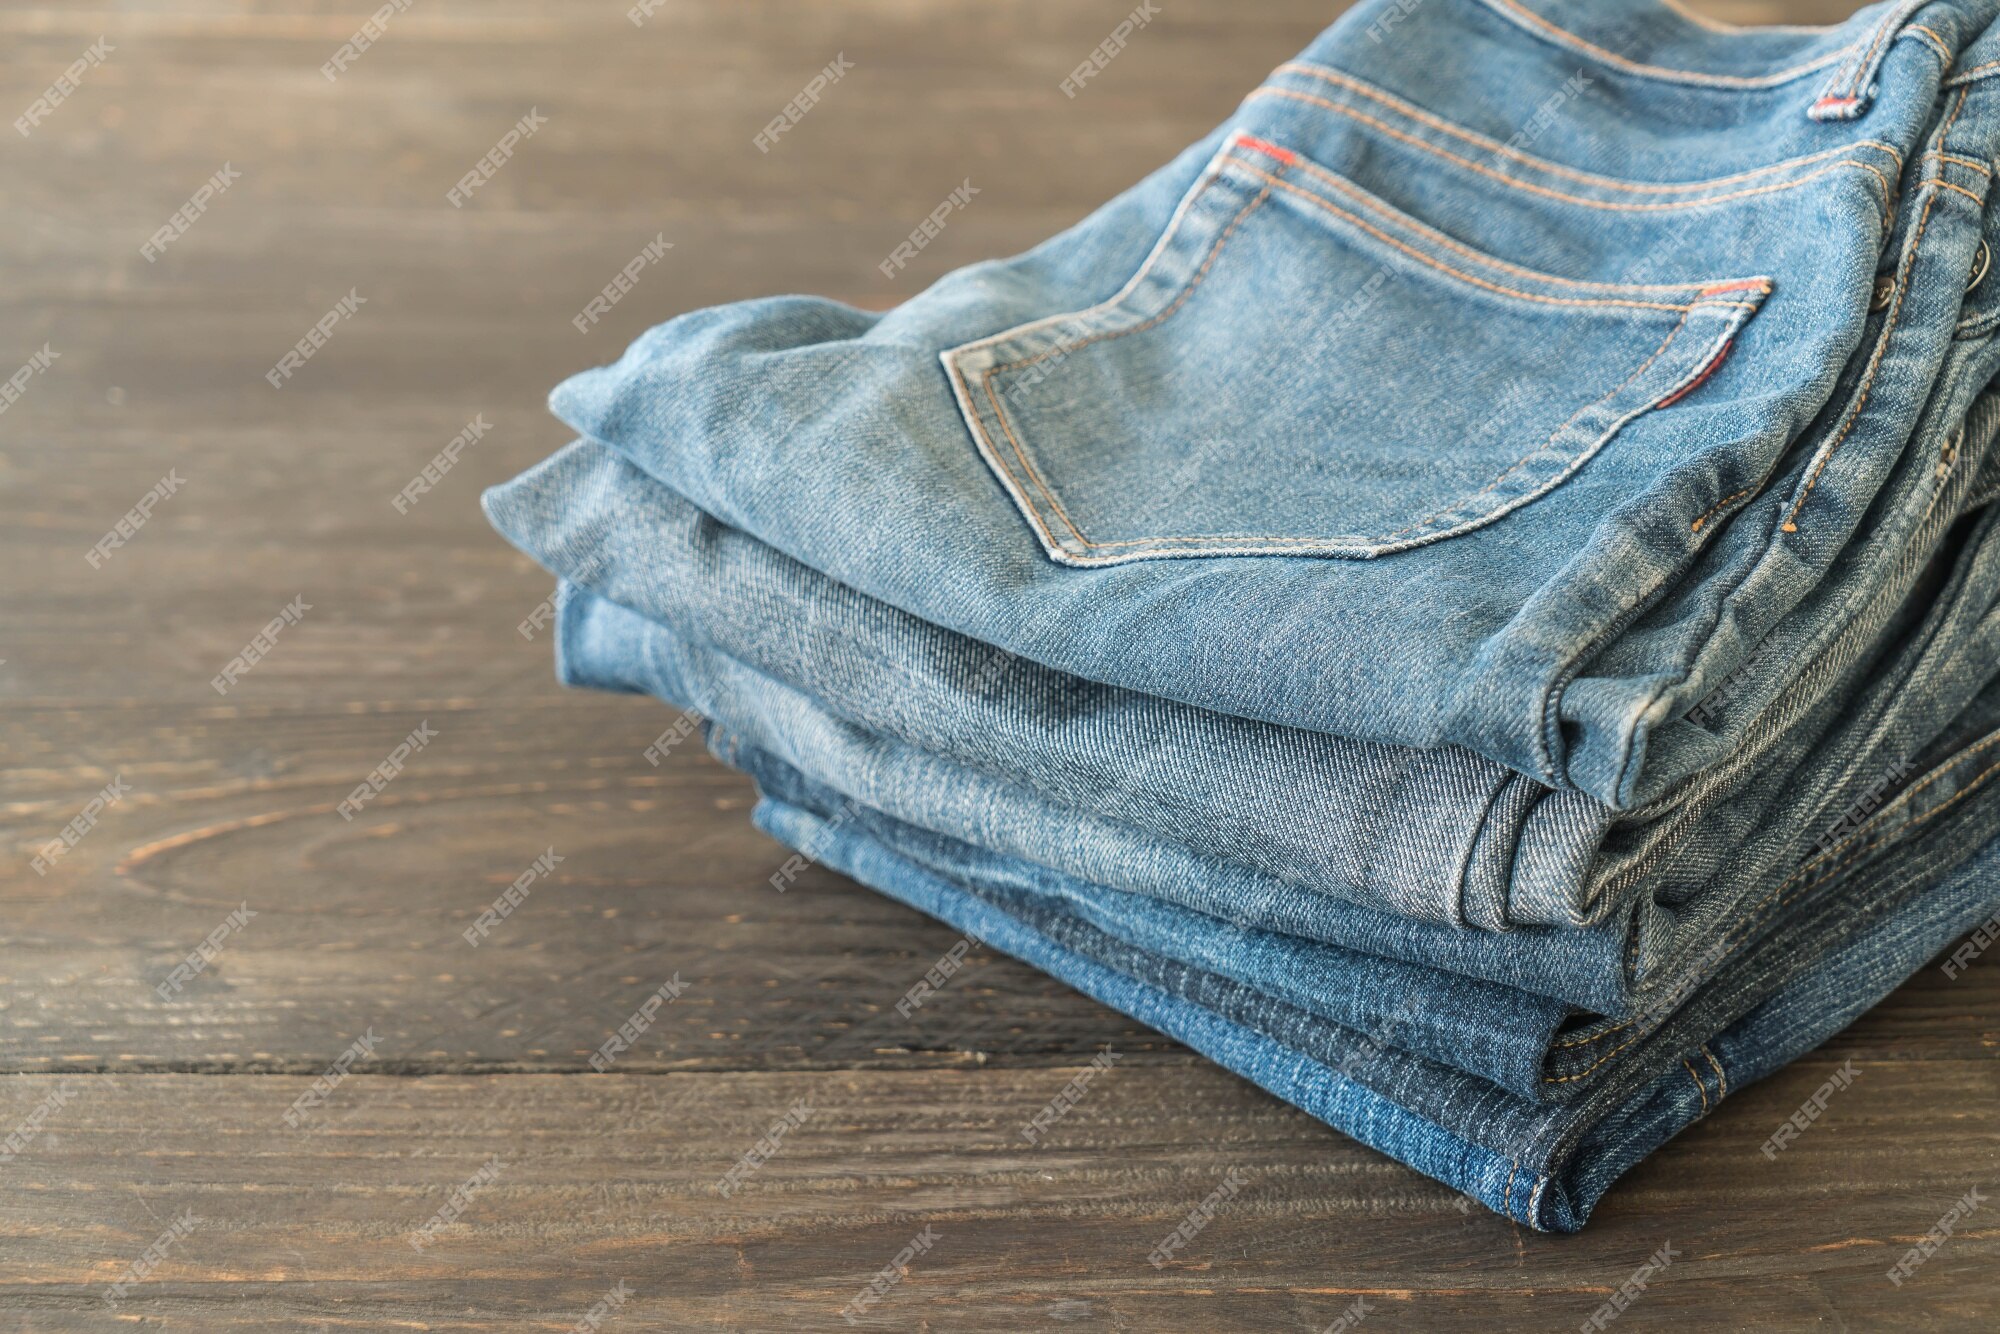 Free Photo | Stacks of jeans clothing on wood